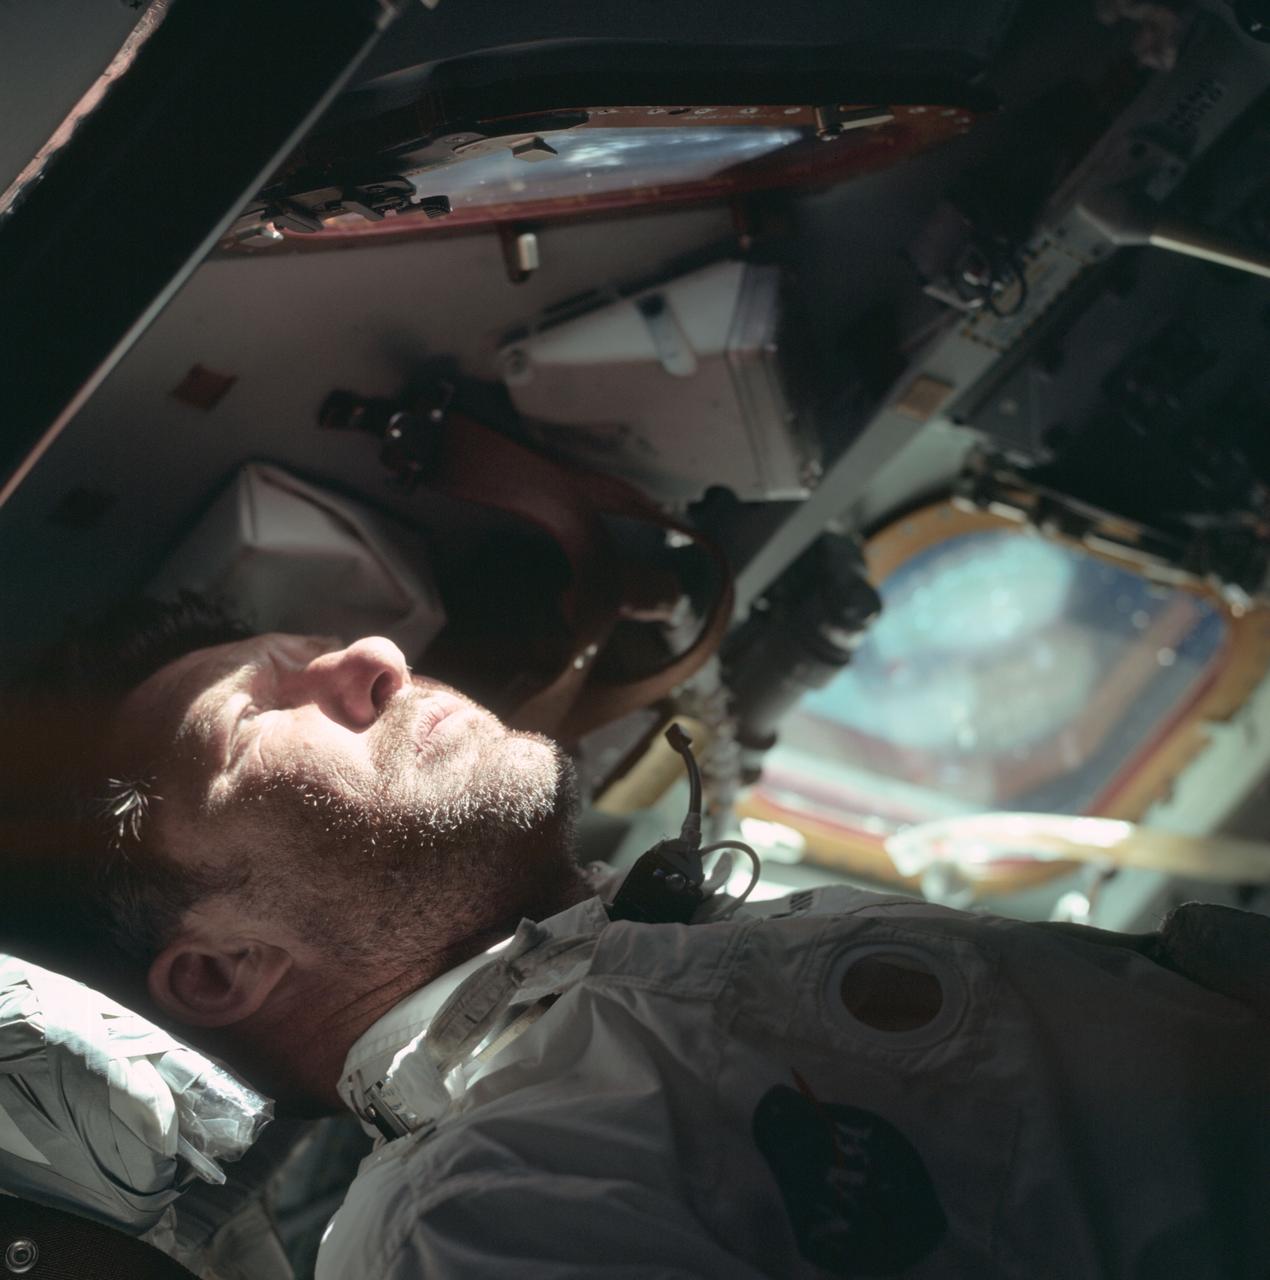 Apollo 7 commander Walter Schirra looks out the rendezvous window on the 9th day of the mission.